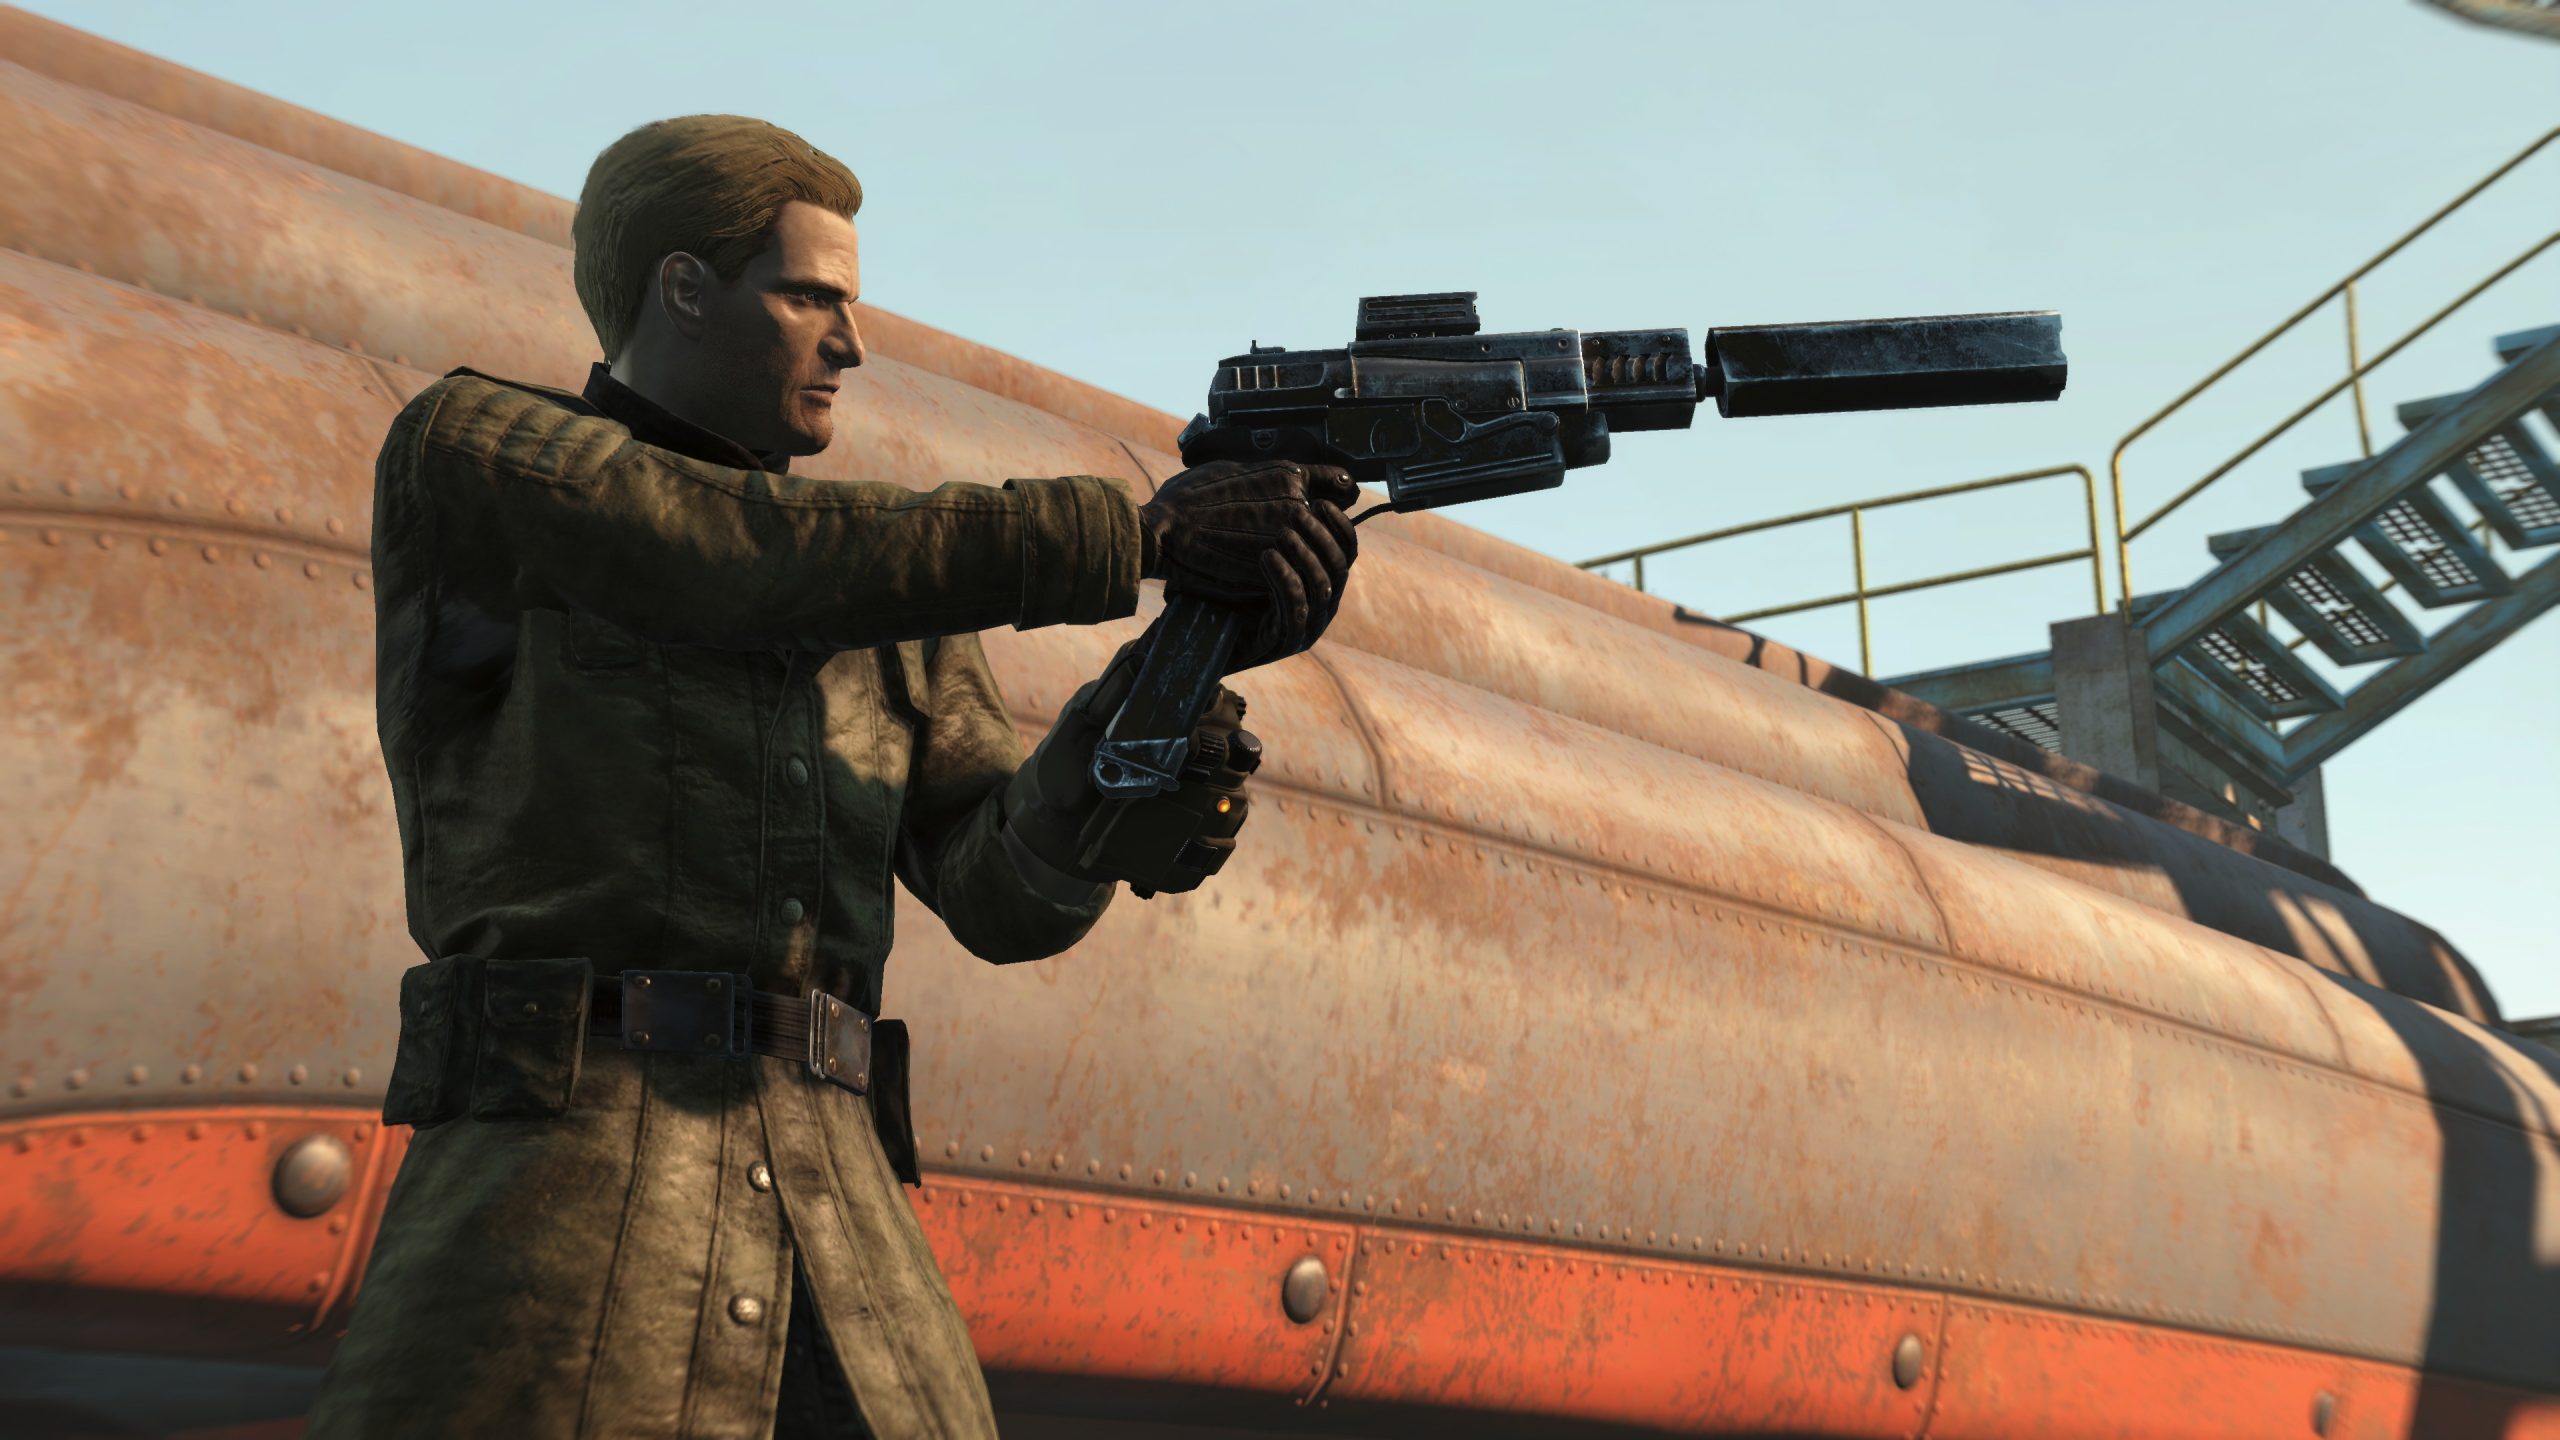 An Enclave officer in a long brown coat raises his weapon, which appears to be a silenced pistol